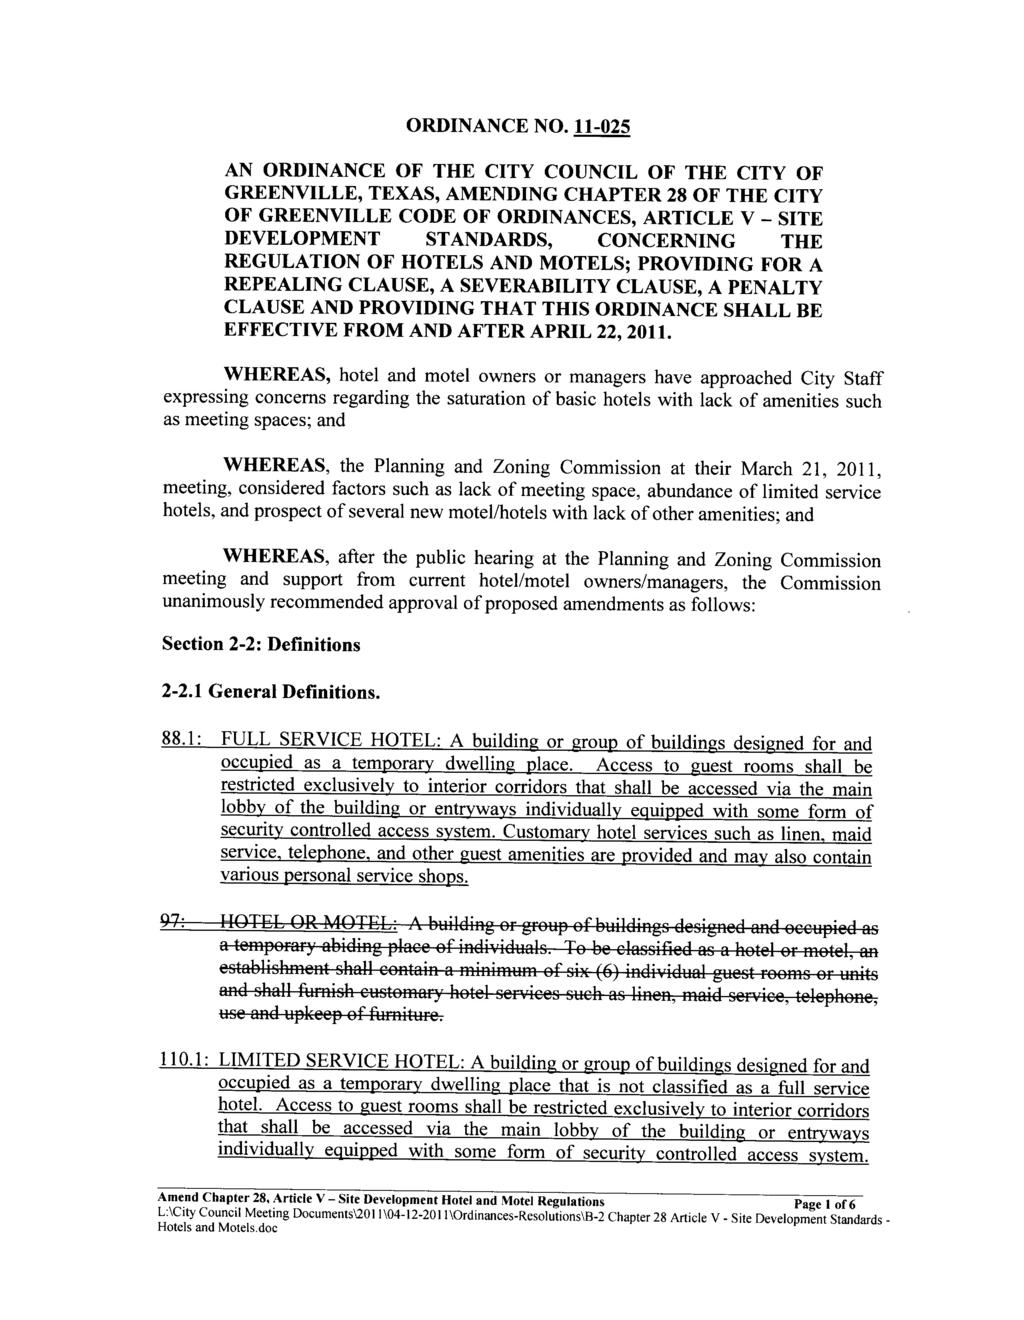 ORDINANCE NO 11 025 AN ORDINANCE OF THE CITY COUNCIL OF THE CITY OF GREENVILLE TEXAS AMENDING CHAPTER 28 OF THE CITY OF GREENVILLE CODE OF ORDINANCES ARTICLE V SITE DEVELOPMENT CONCERNING THE